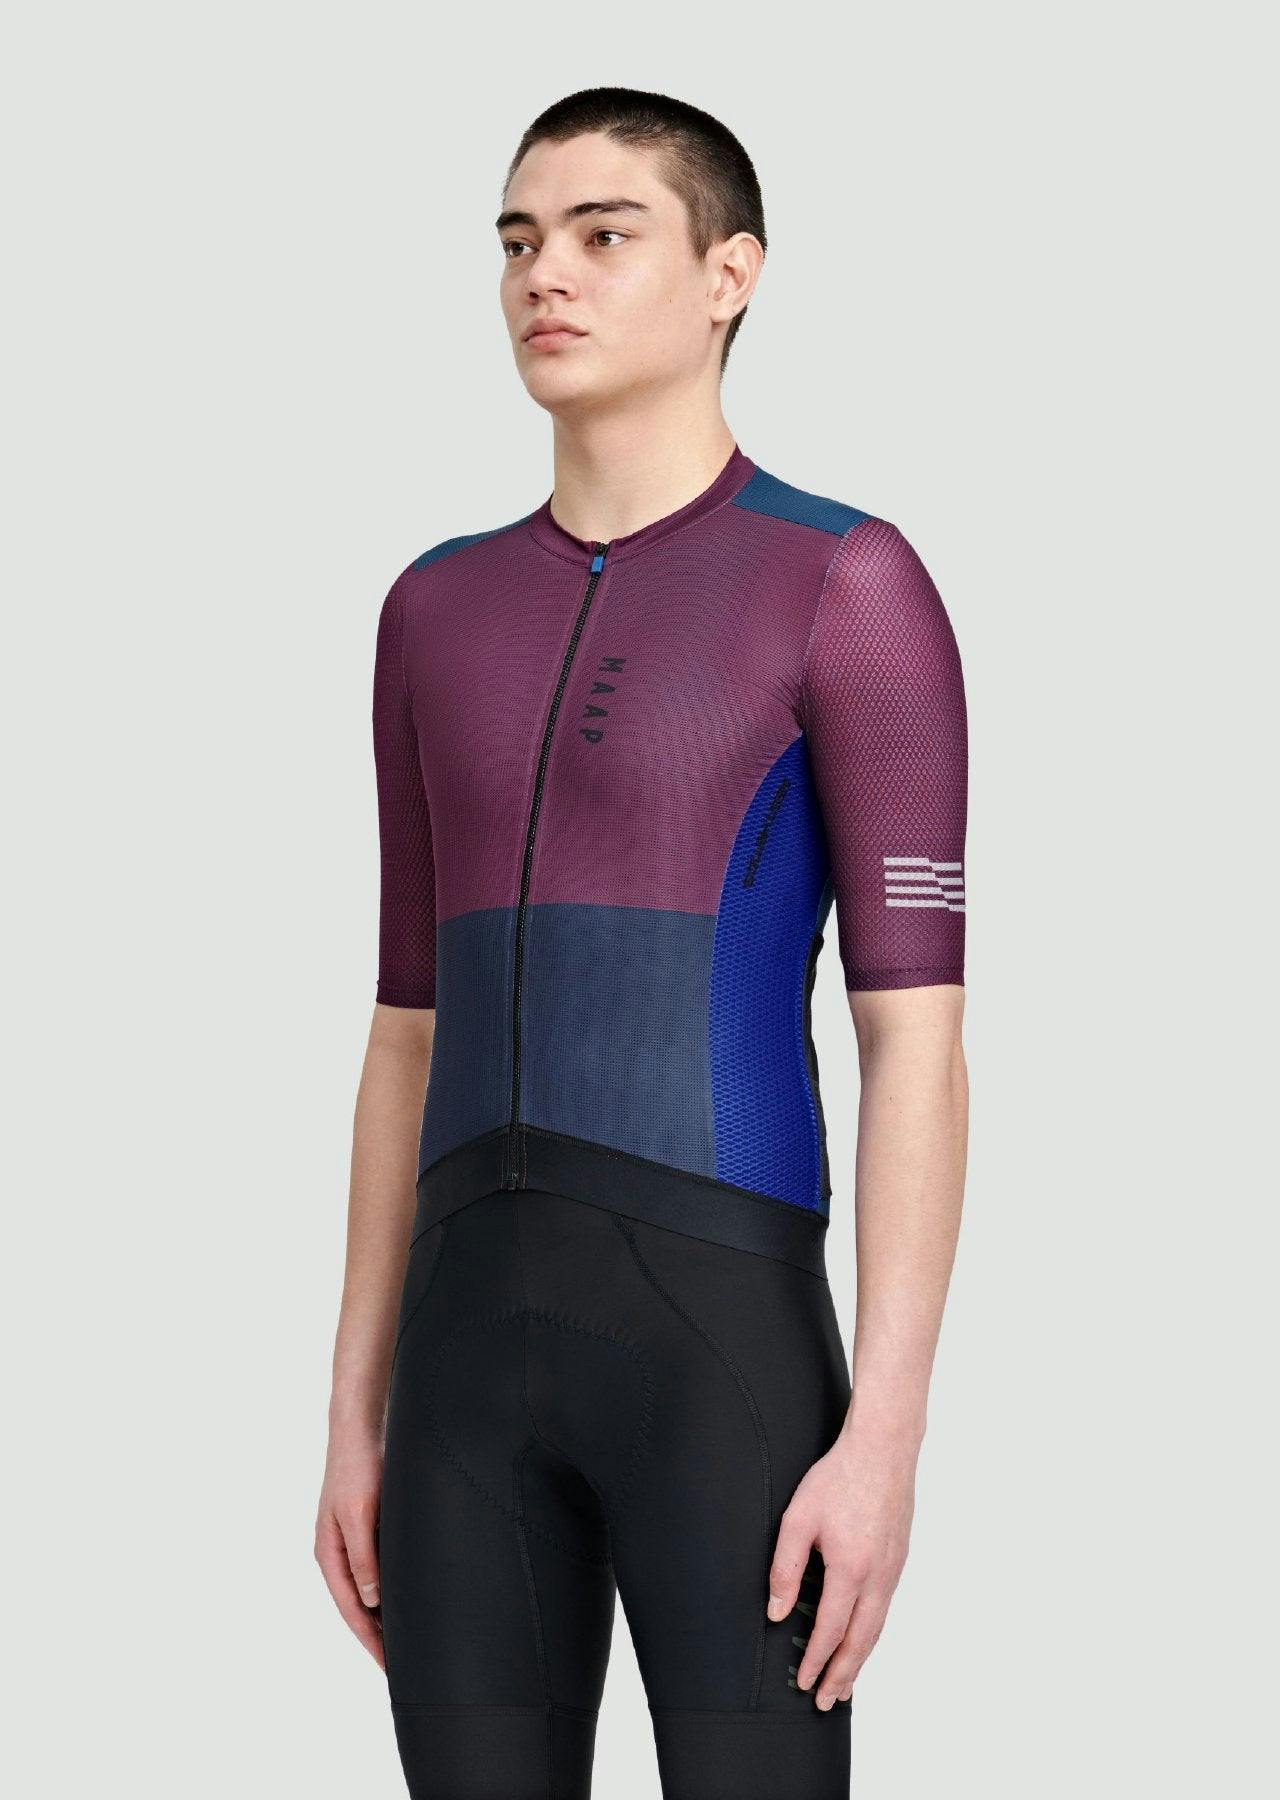 Voyage Pro Air Jersey